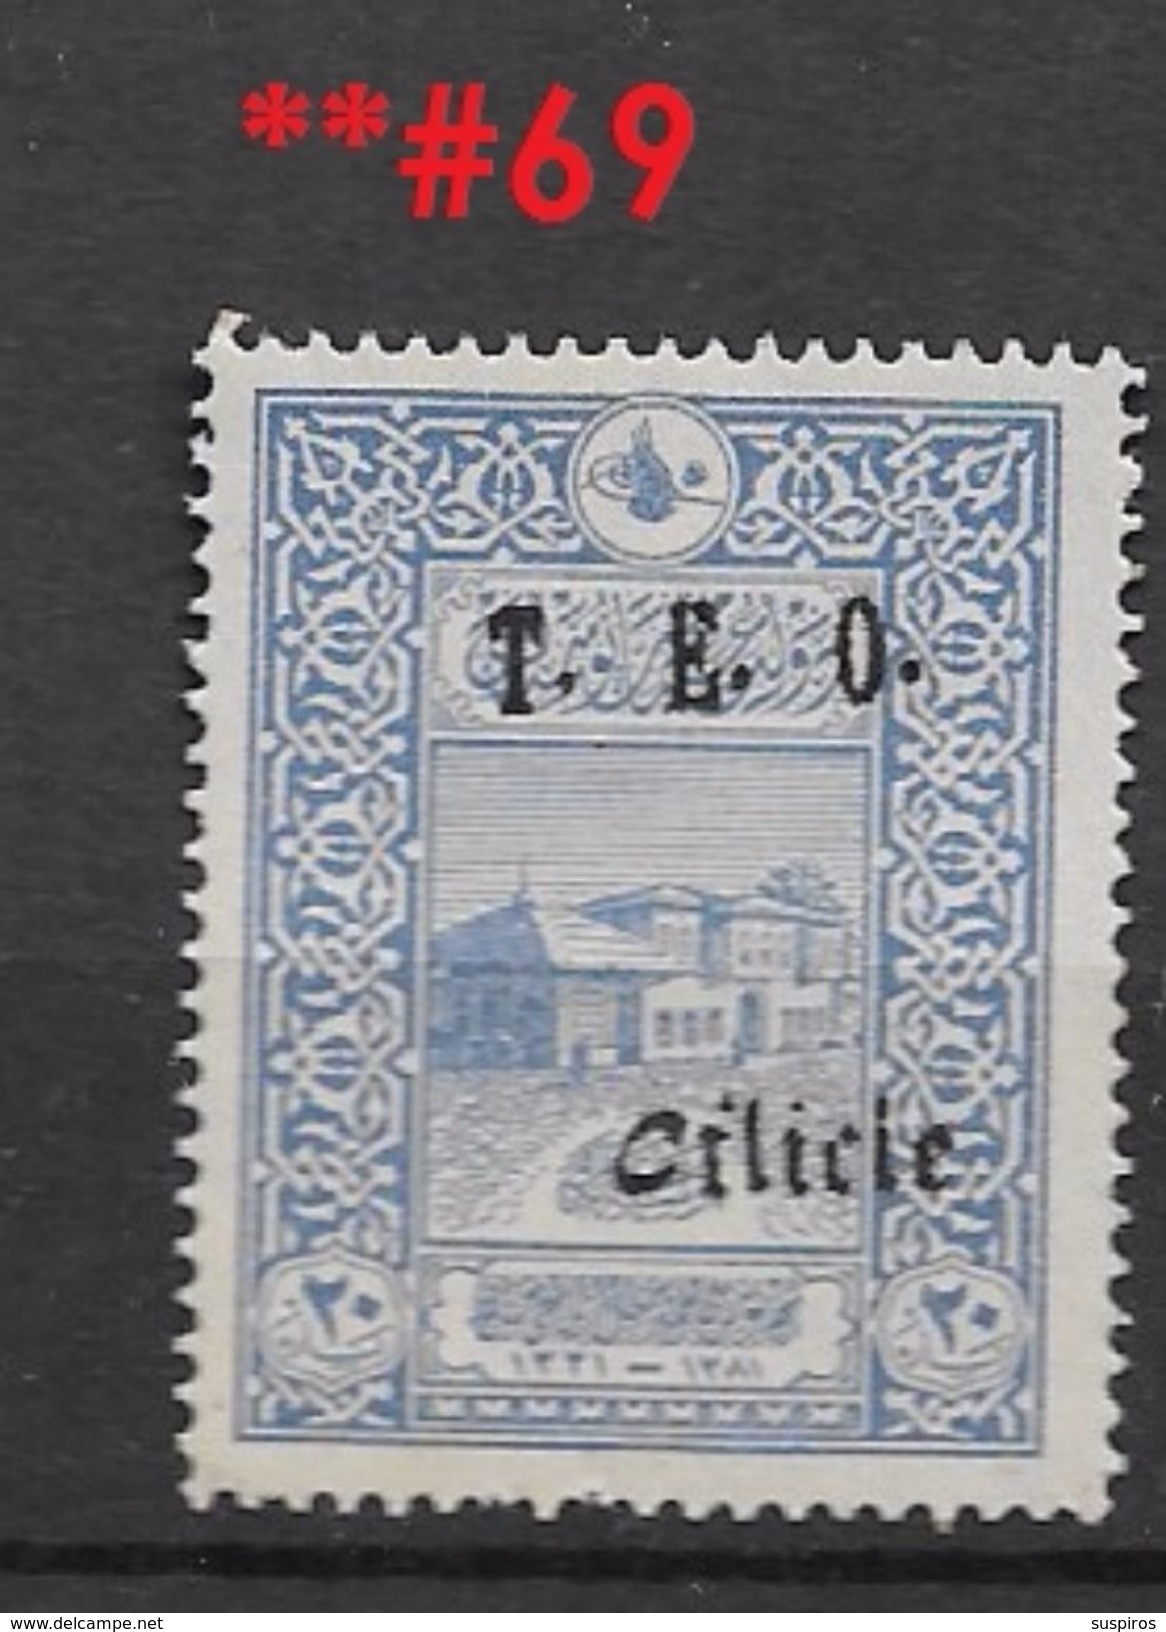 CILICIA  YVERT 69 **1919 Turkish Postage Stamps Of 1916 Handstamp Overprinted "CILICIE" T.E.O MNH - Unused Stamps